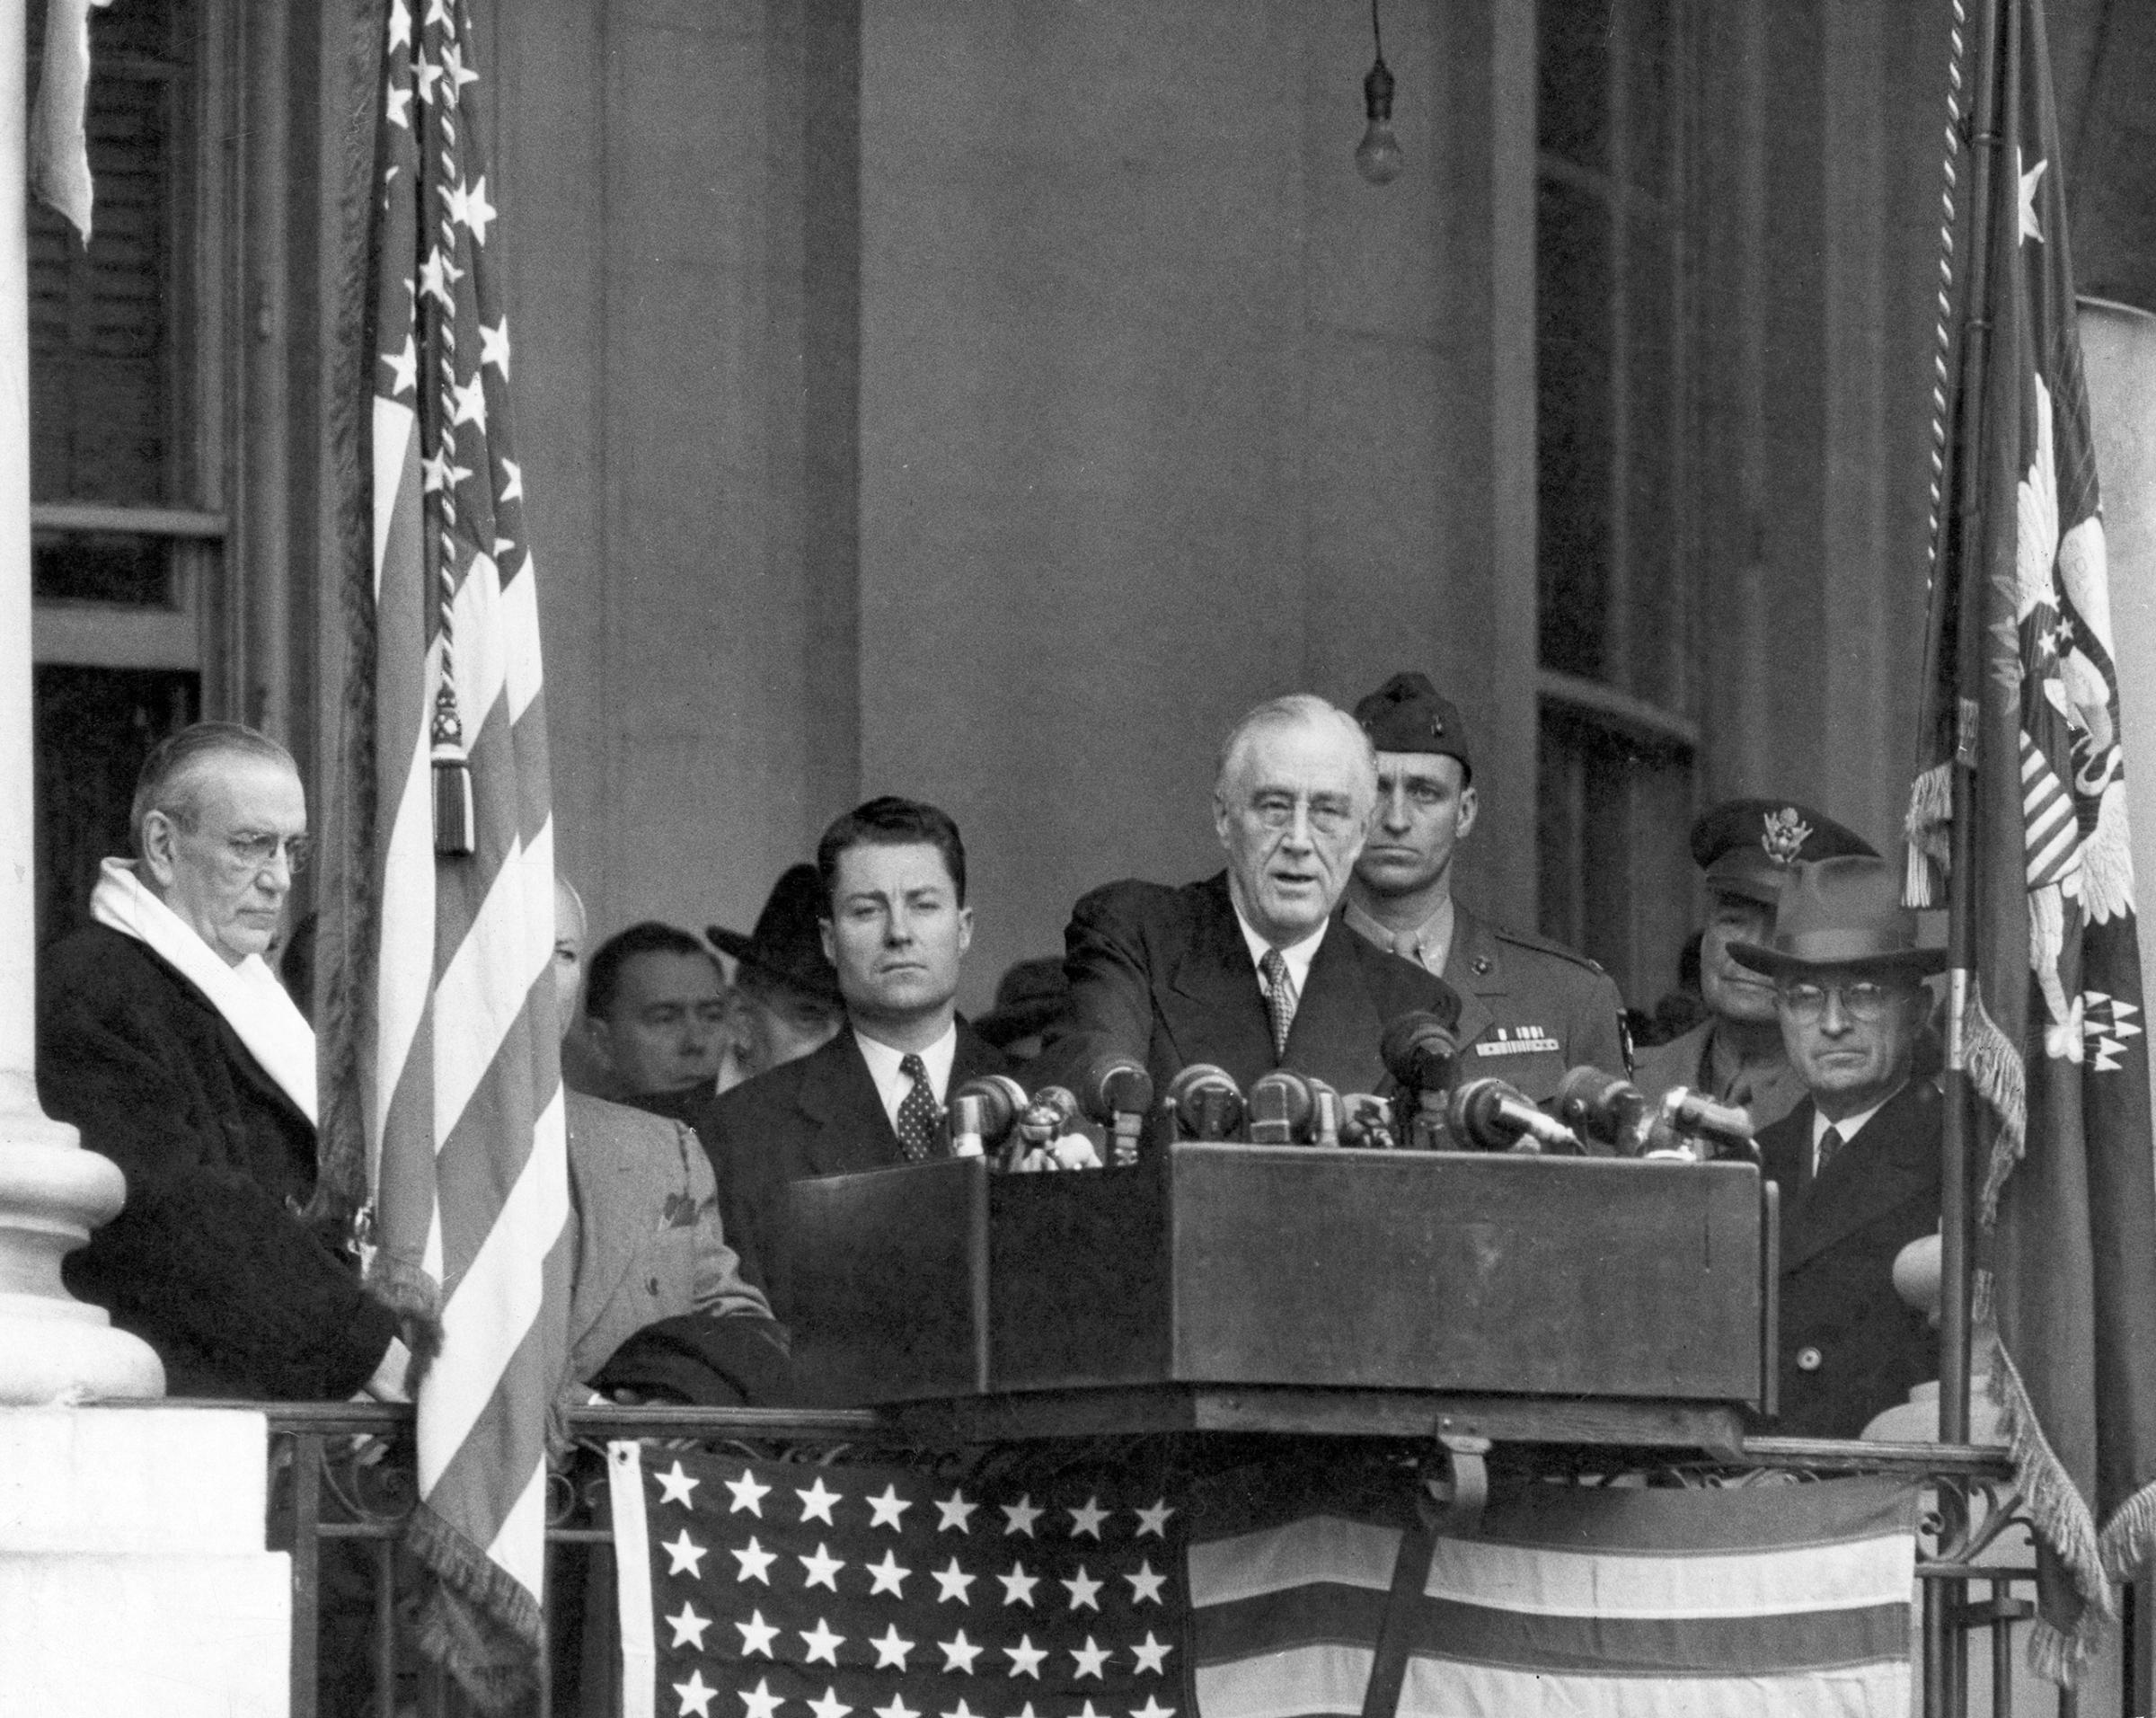 Franklin D. Roosevelt gives his fourth inaugural address, 1945.